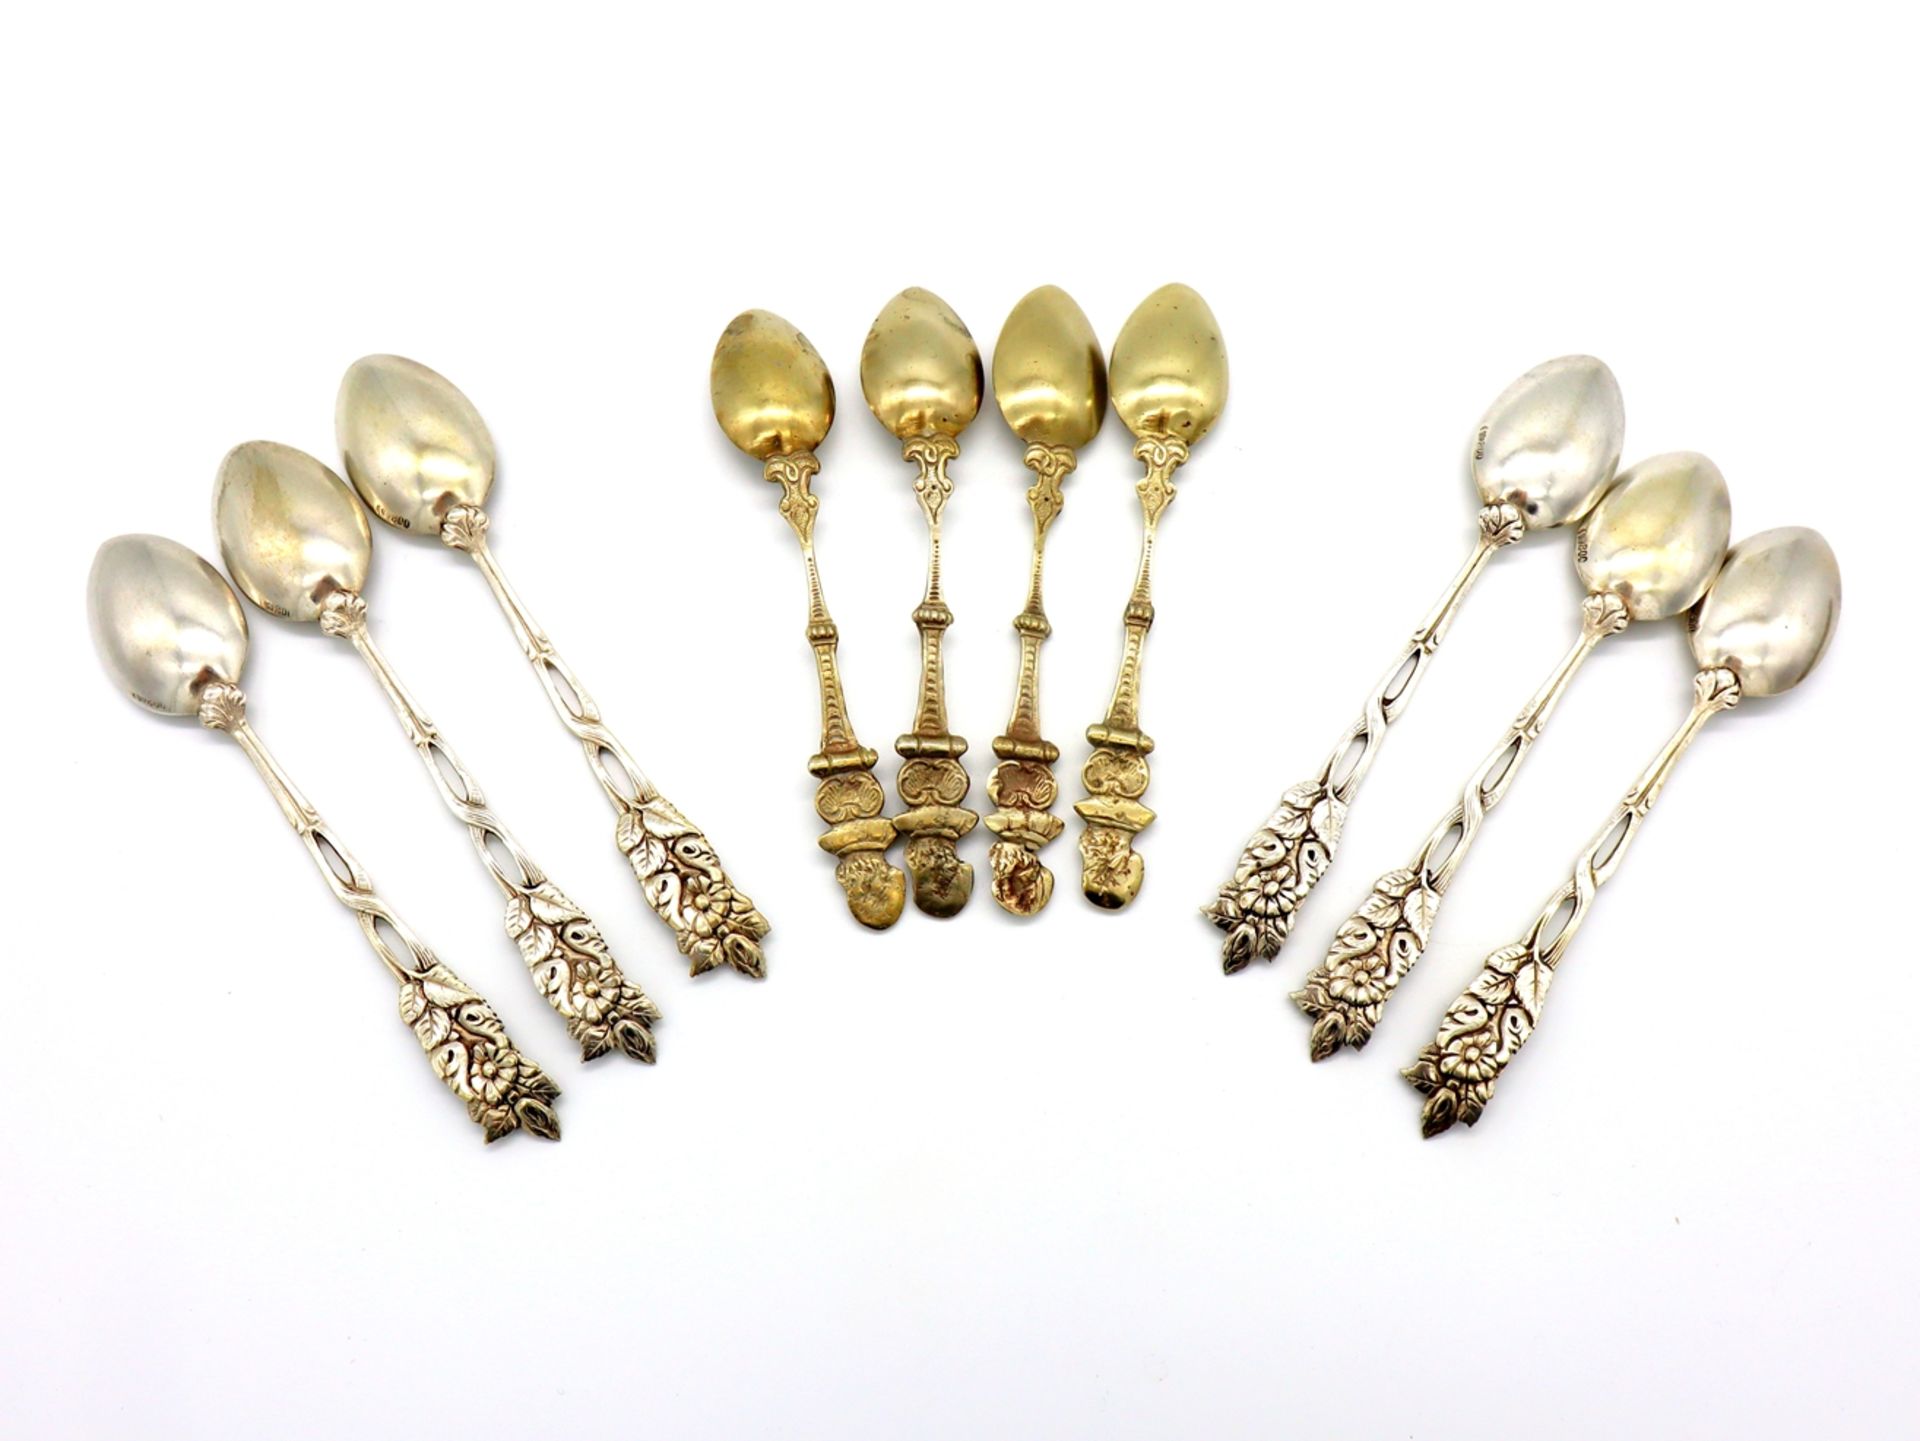 6 dessert spoons Hanauer Rose, 800 silver & 4 dessert spoons silver plated in case. - Image 4 of 8